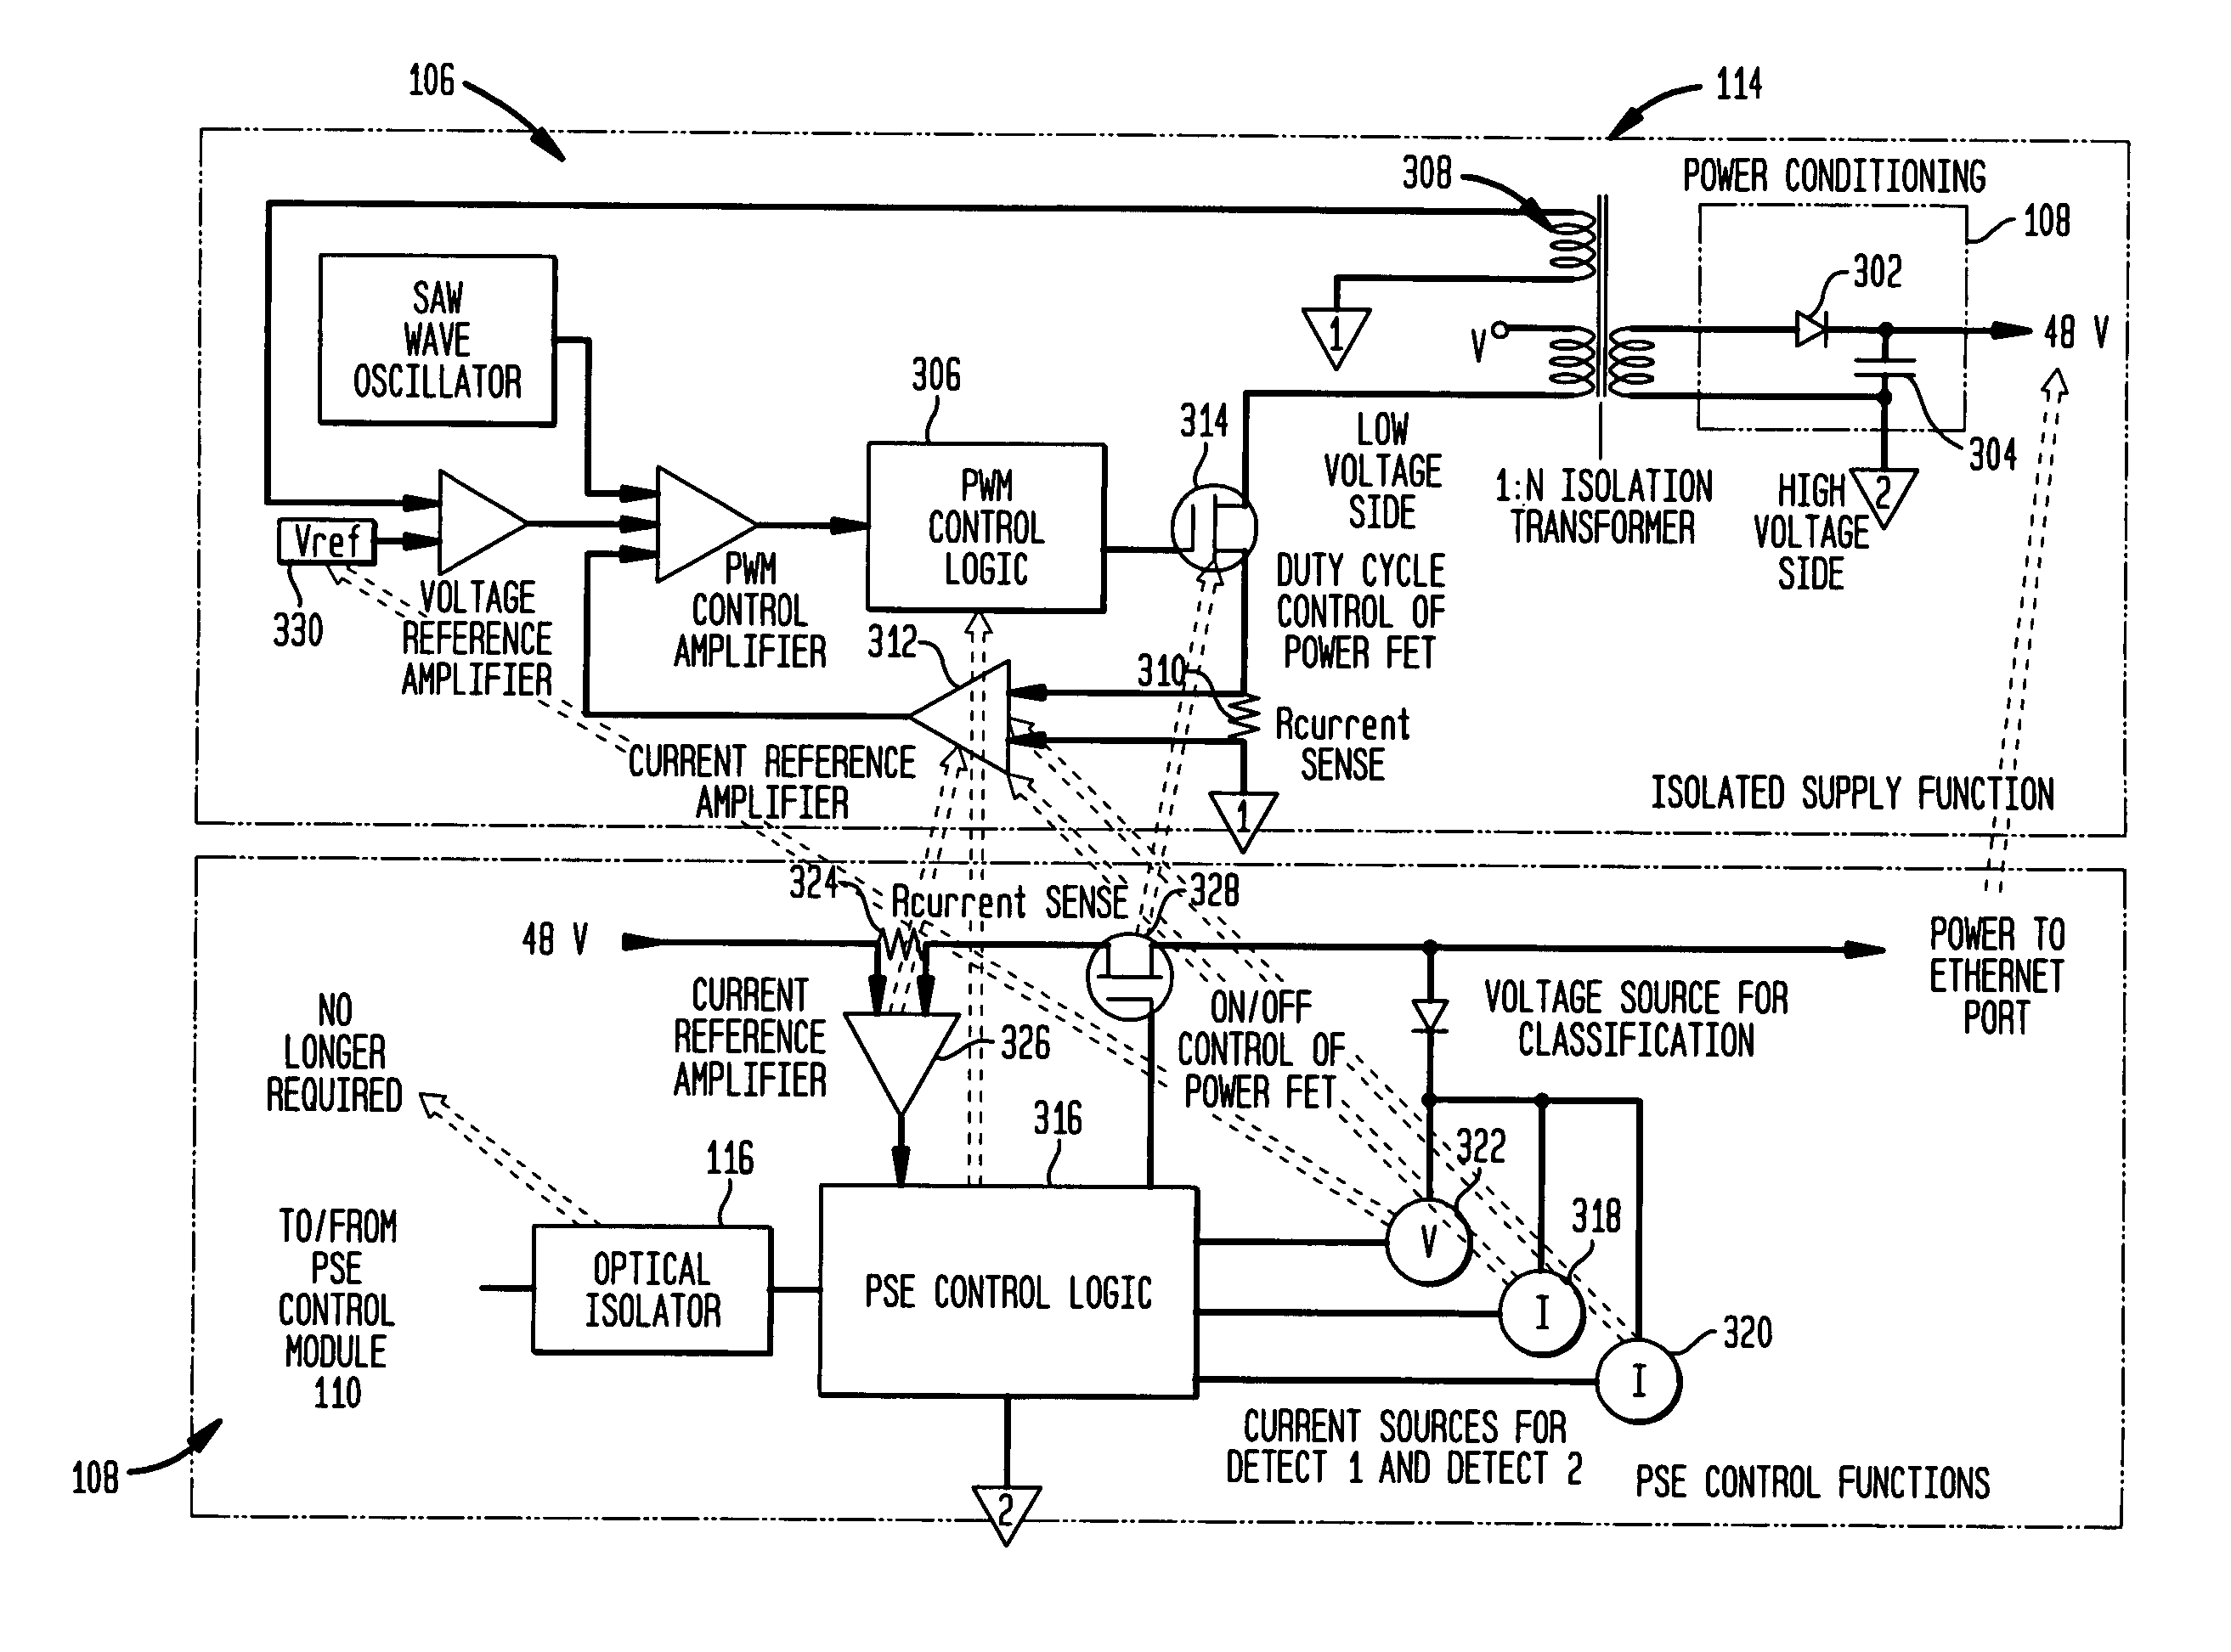 Switch with fully isolated power sourcing equipment control